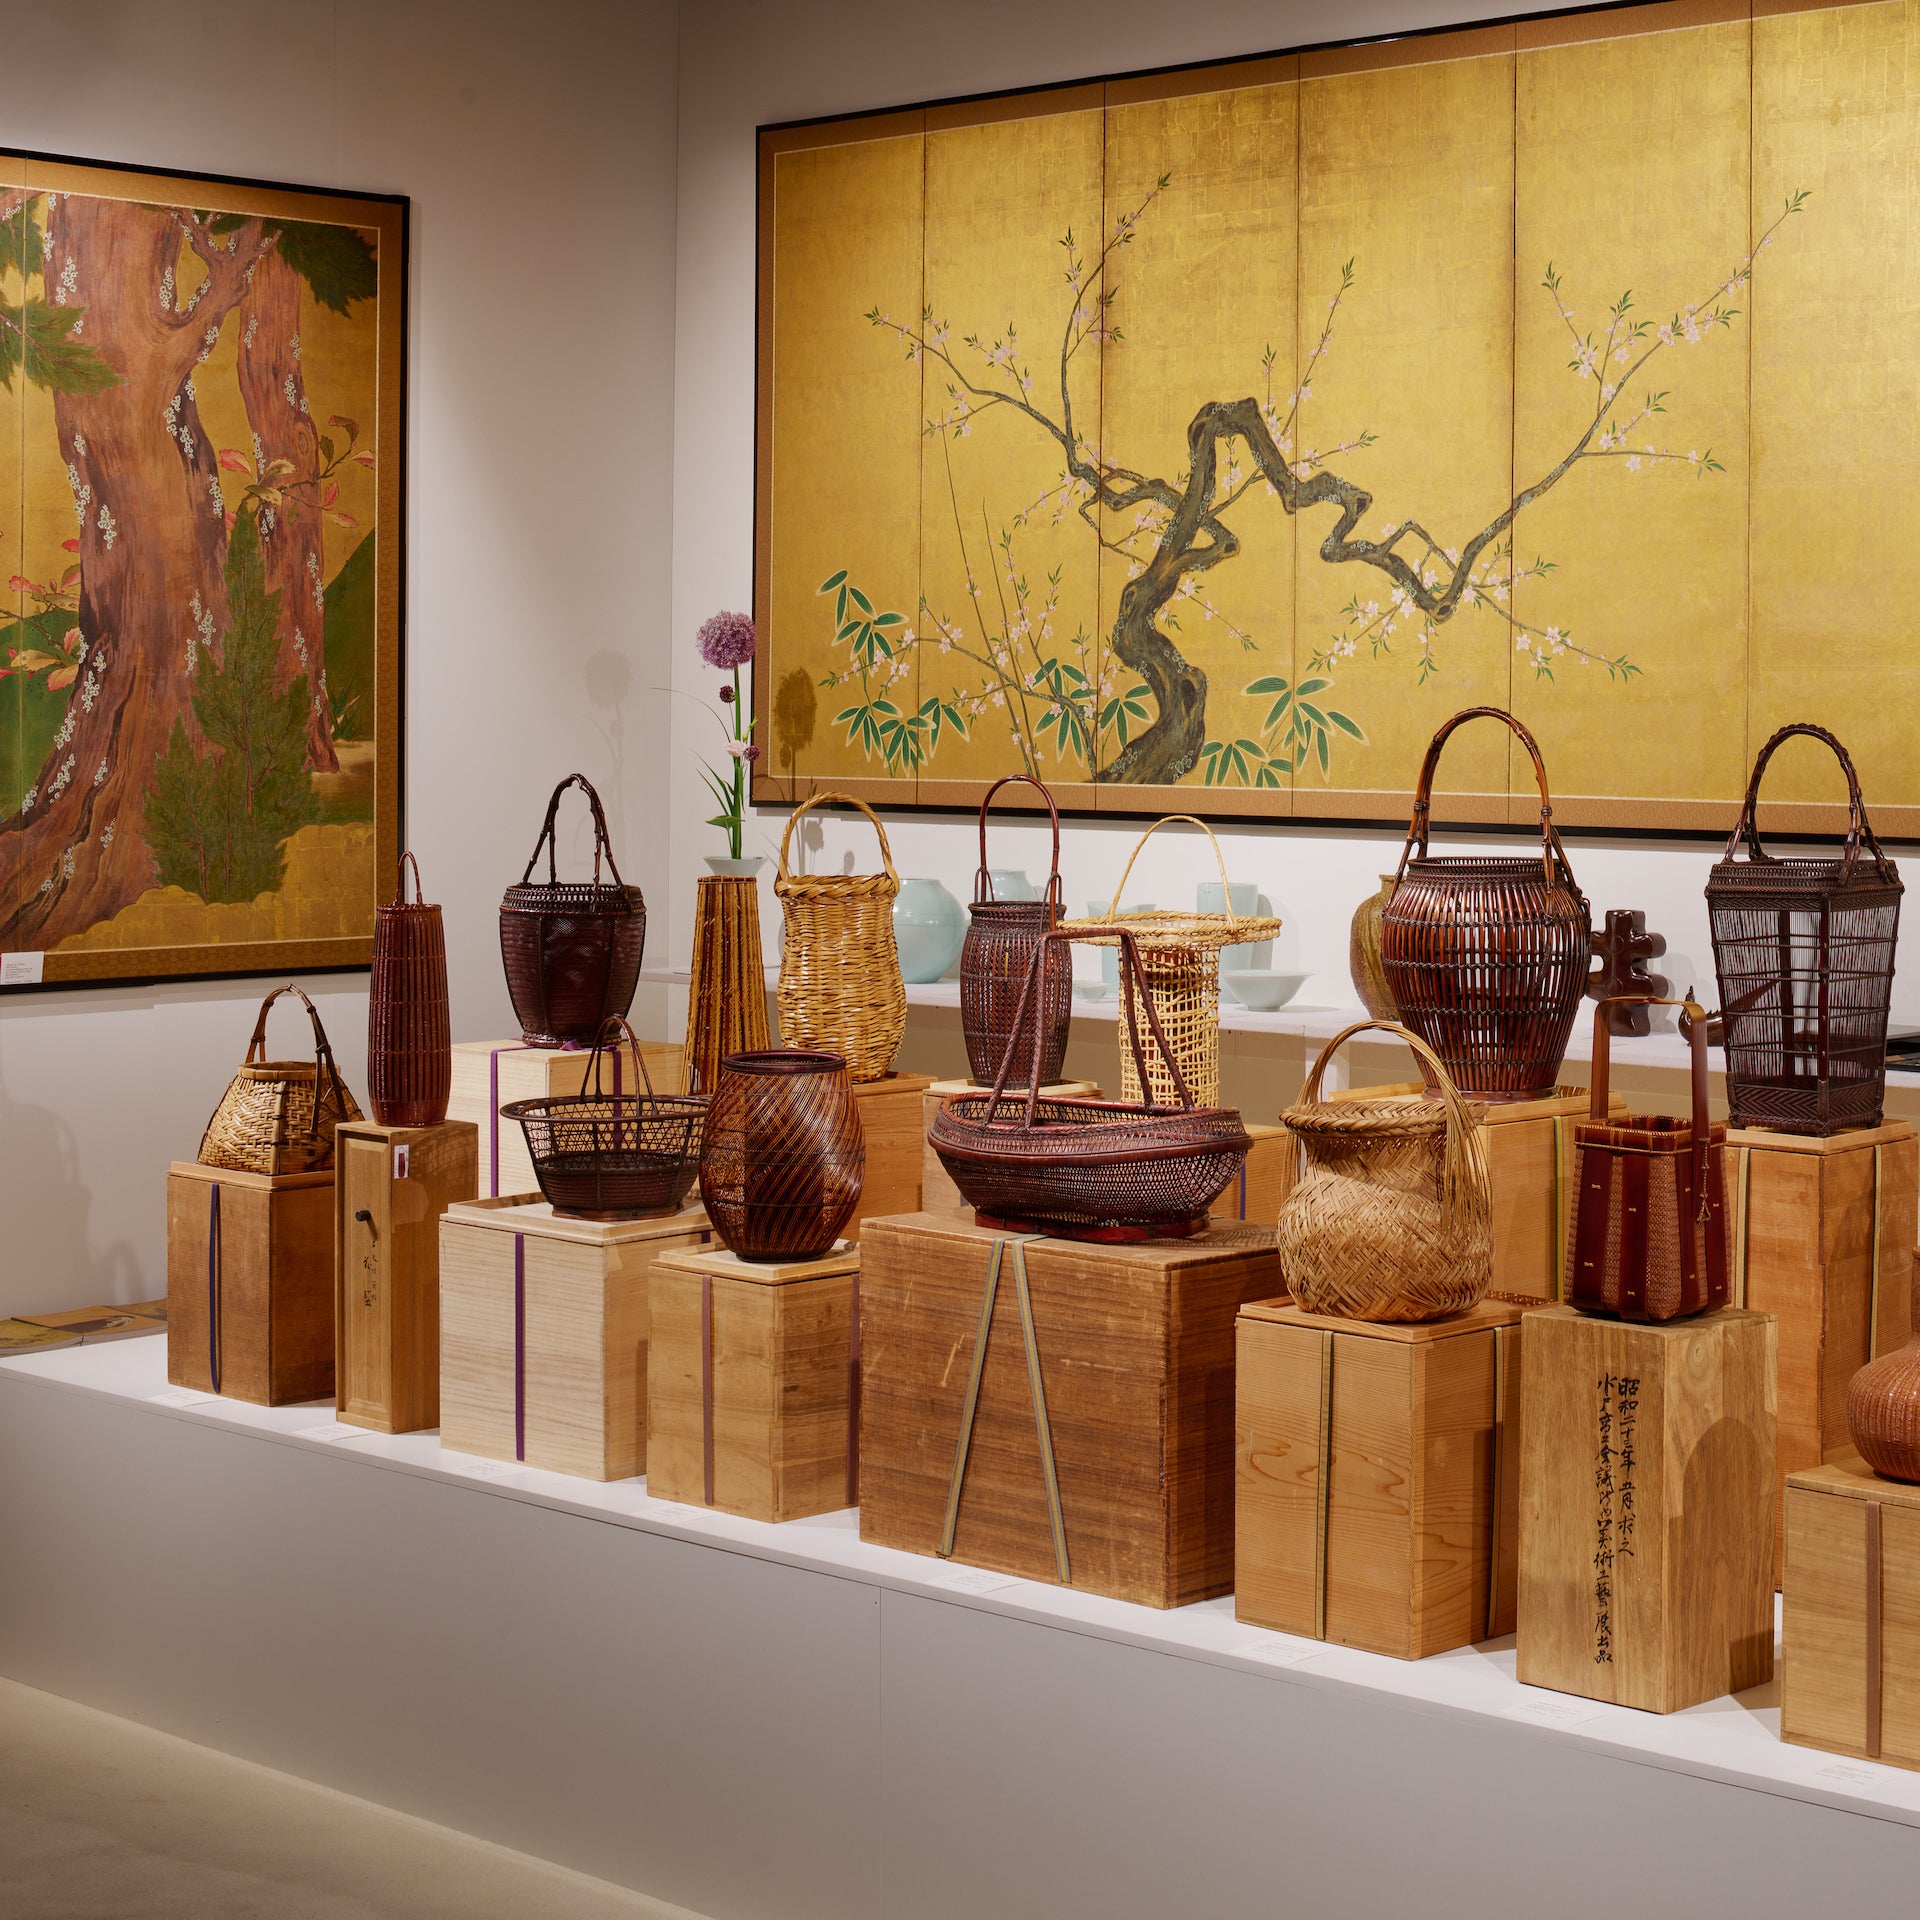 Bamboo baskets made by the greatest Japanese bamboo artists of the modern through contemporary periods, presented by Thomsen Gallery at Design Miami/ Basel 2023. Photo © James Harris for Design Miami/ Basel